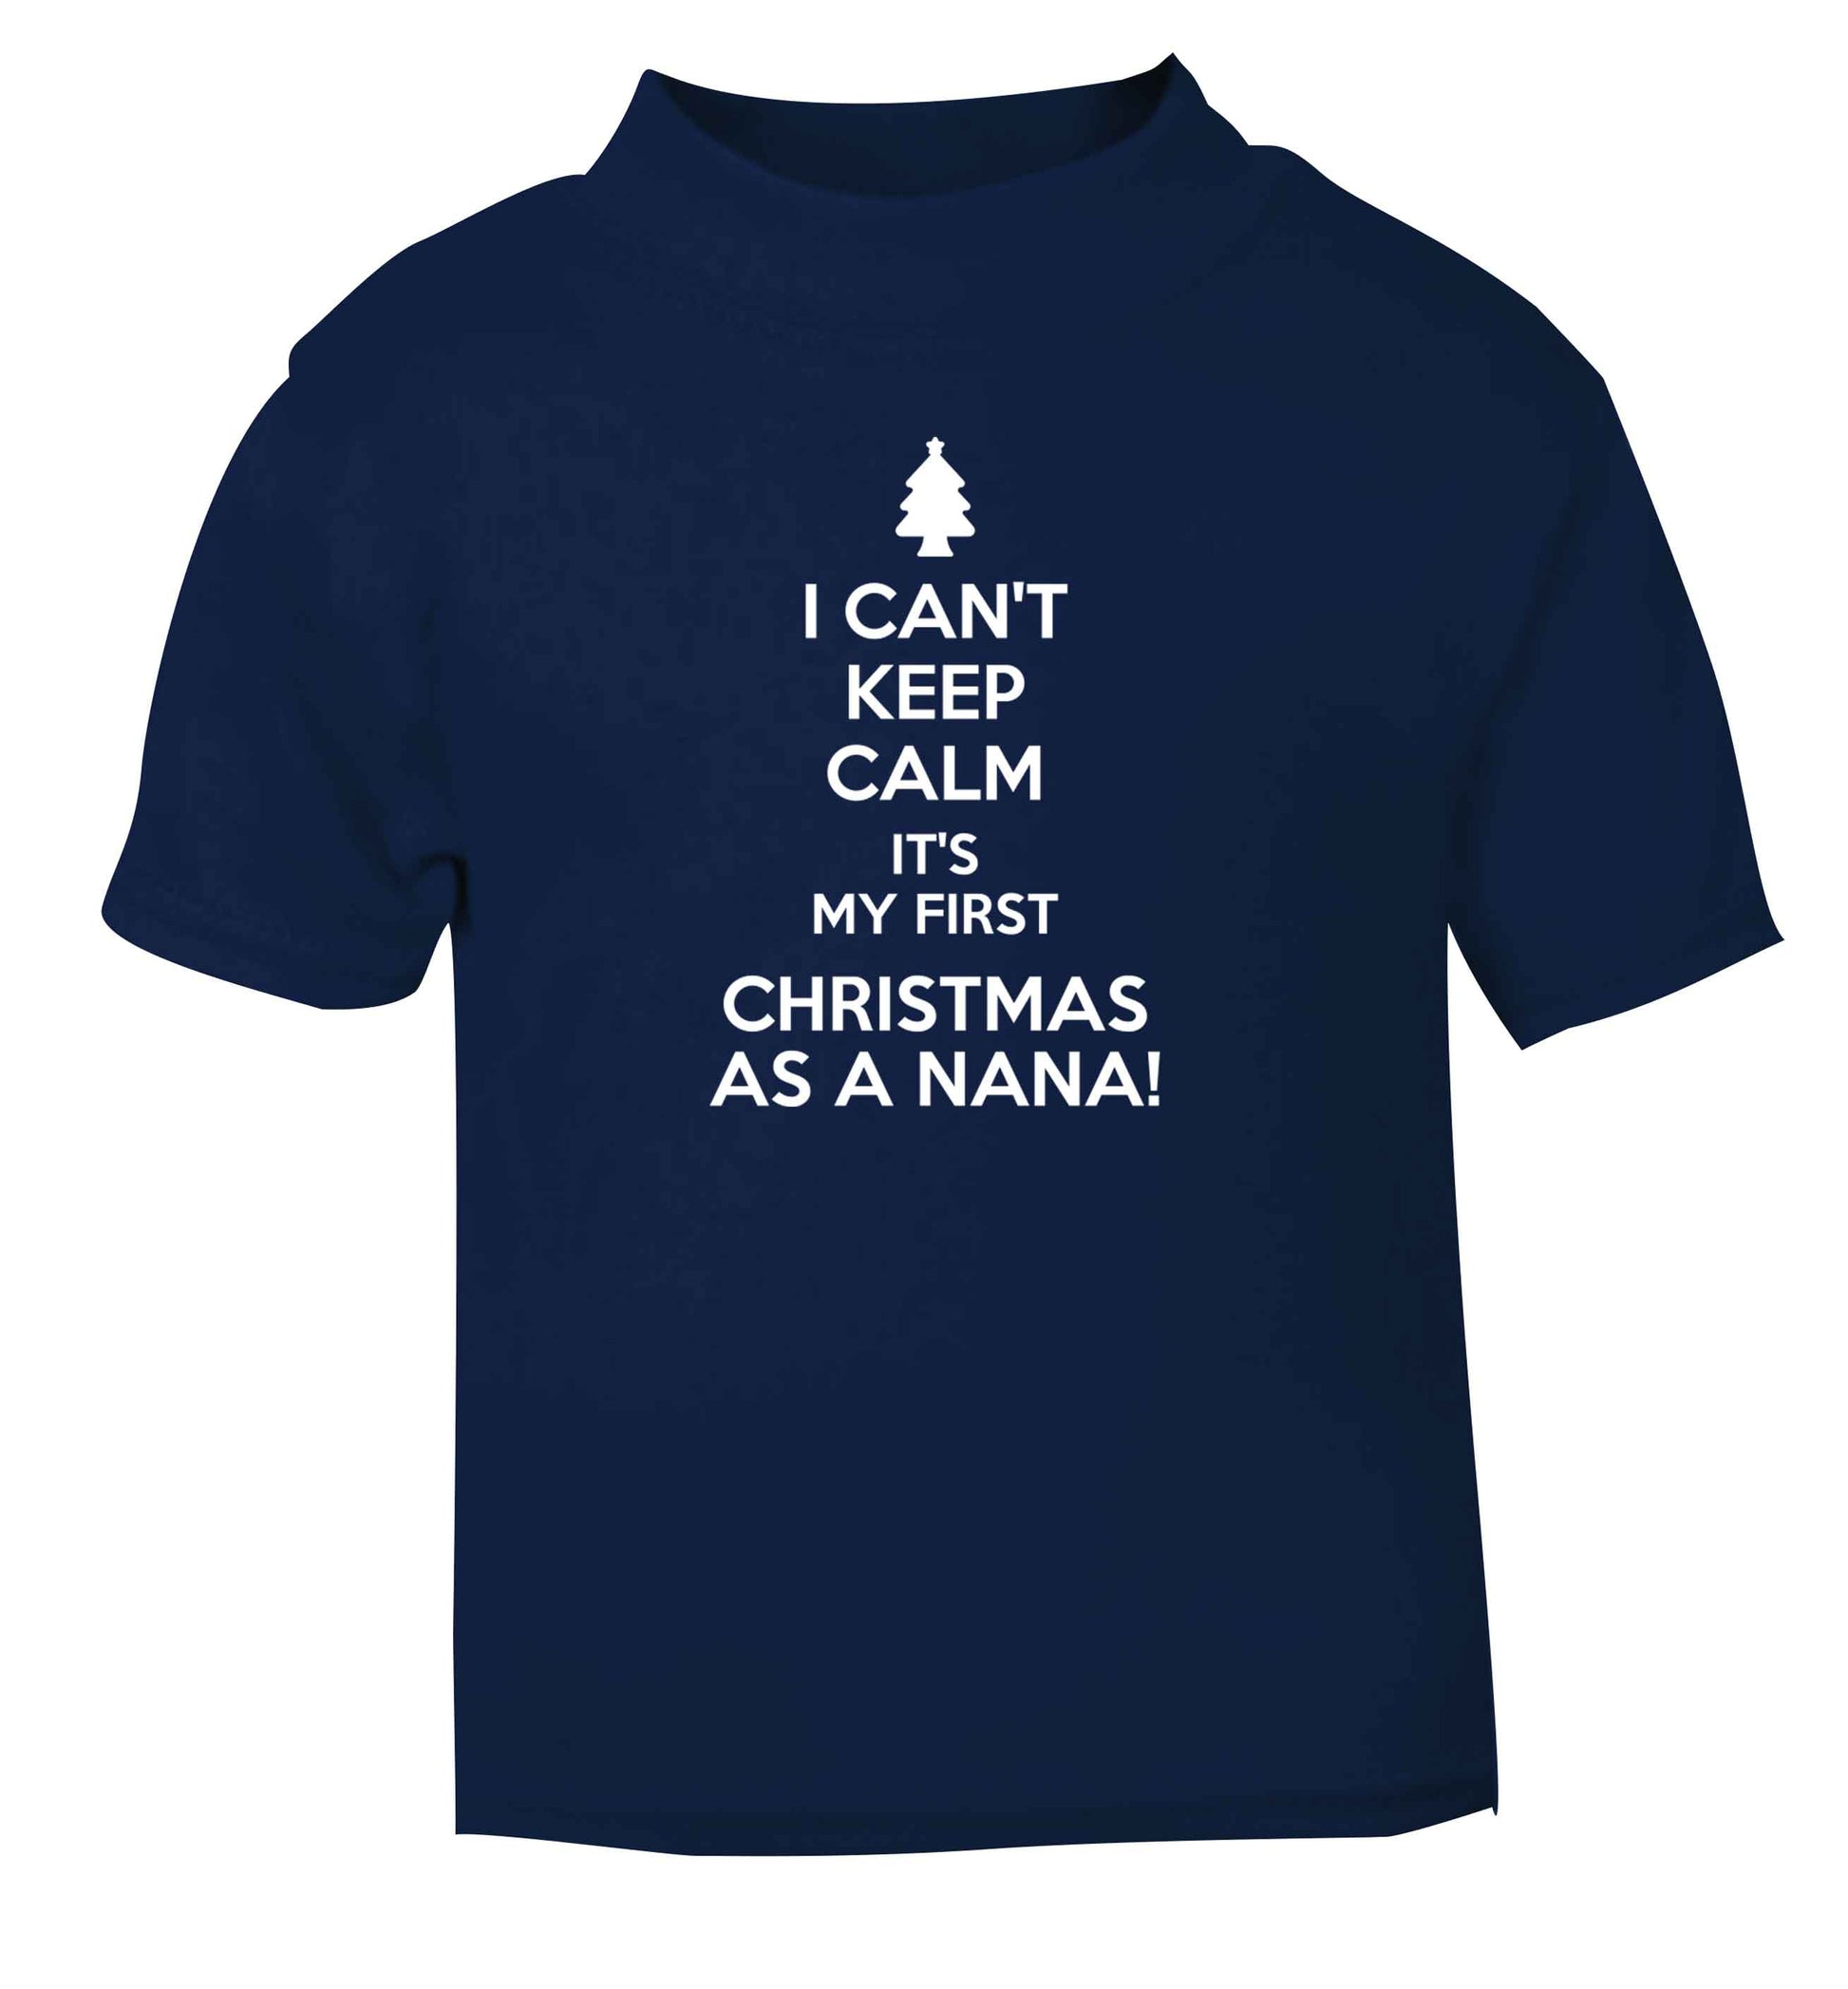 I can't keep calm it's my first Christmas as a nana! navy Baby Toddler Tshirt 2 Years